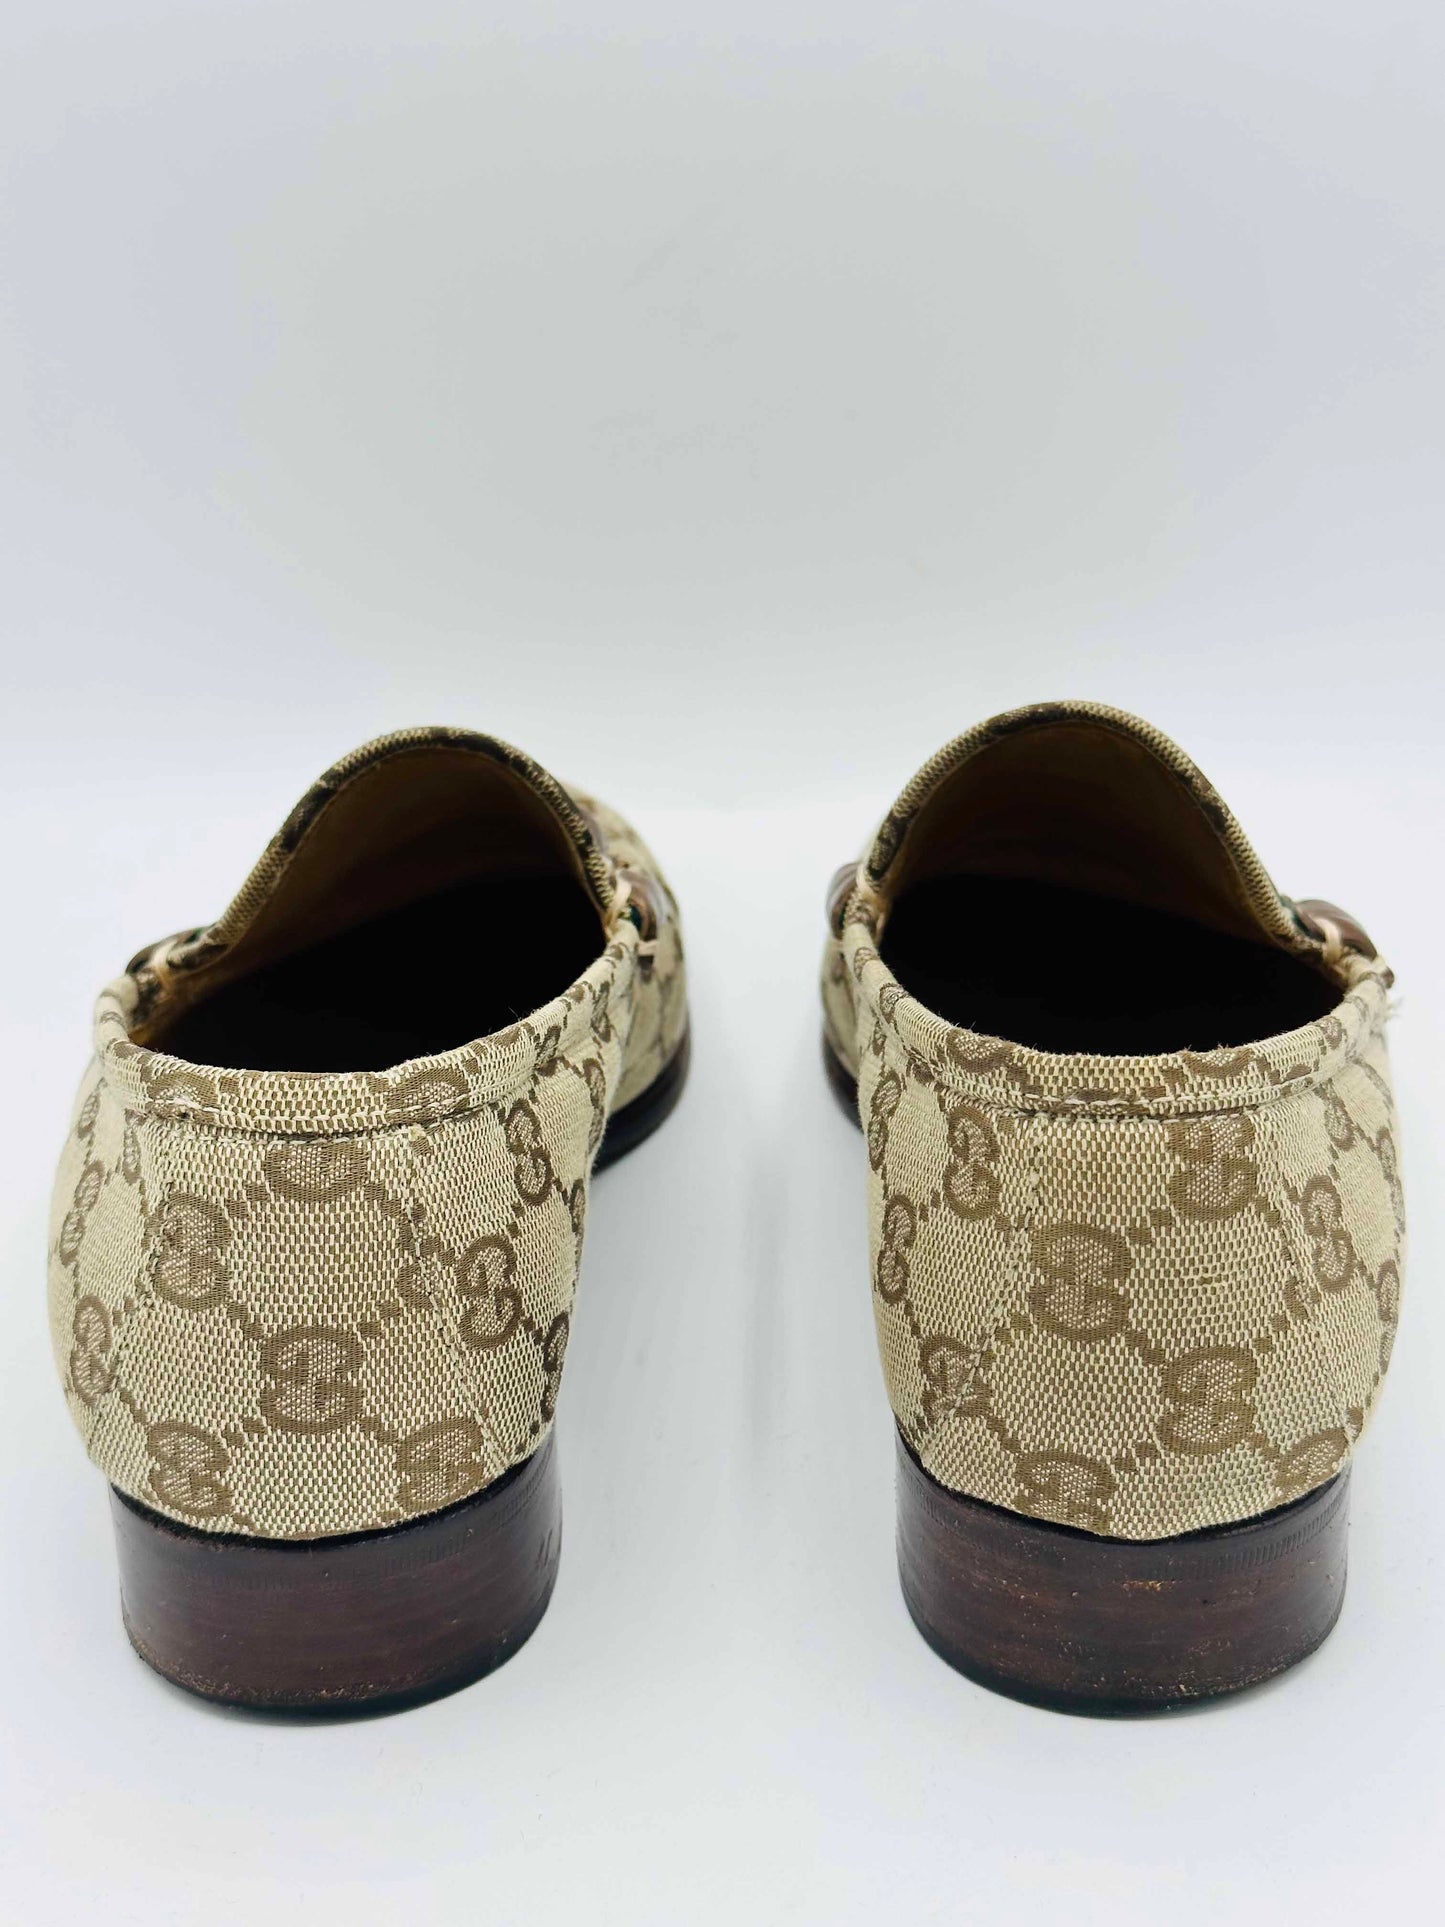 1970's Gucci Monogram Horse bit Loafers